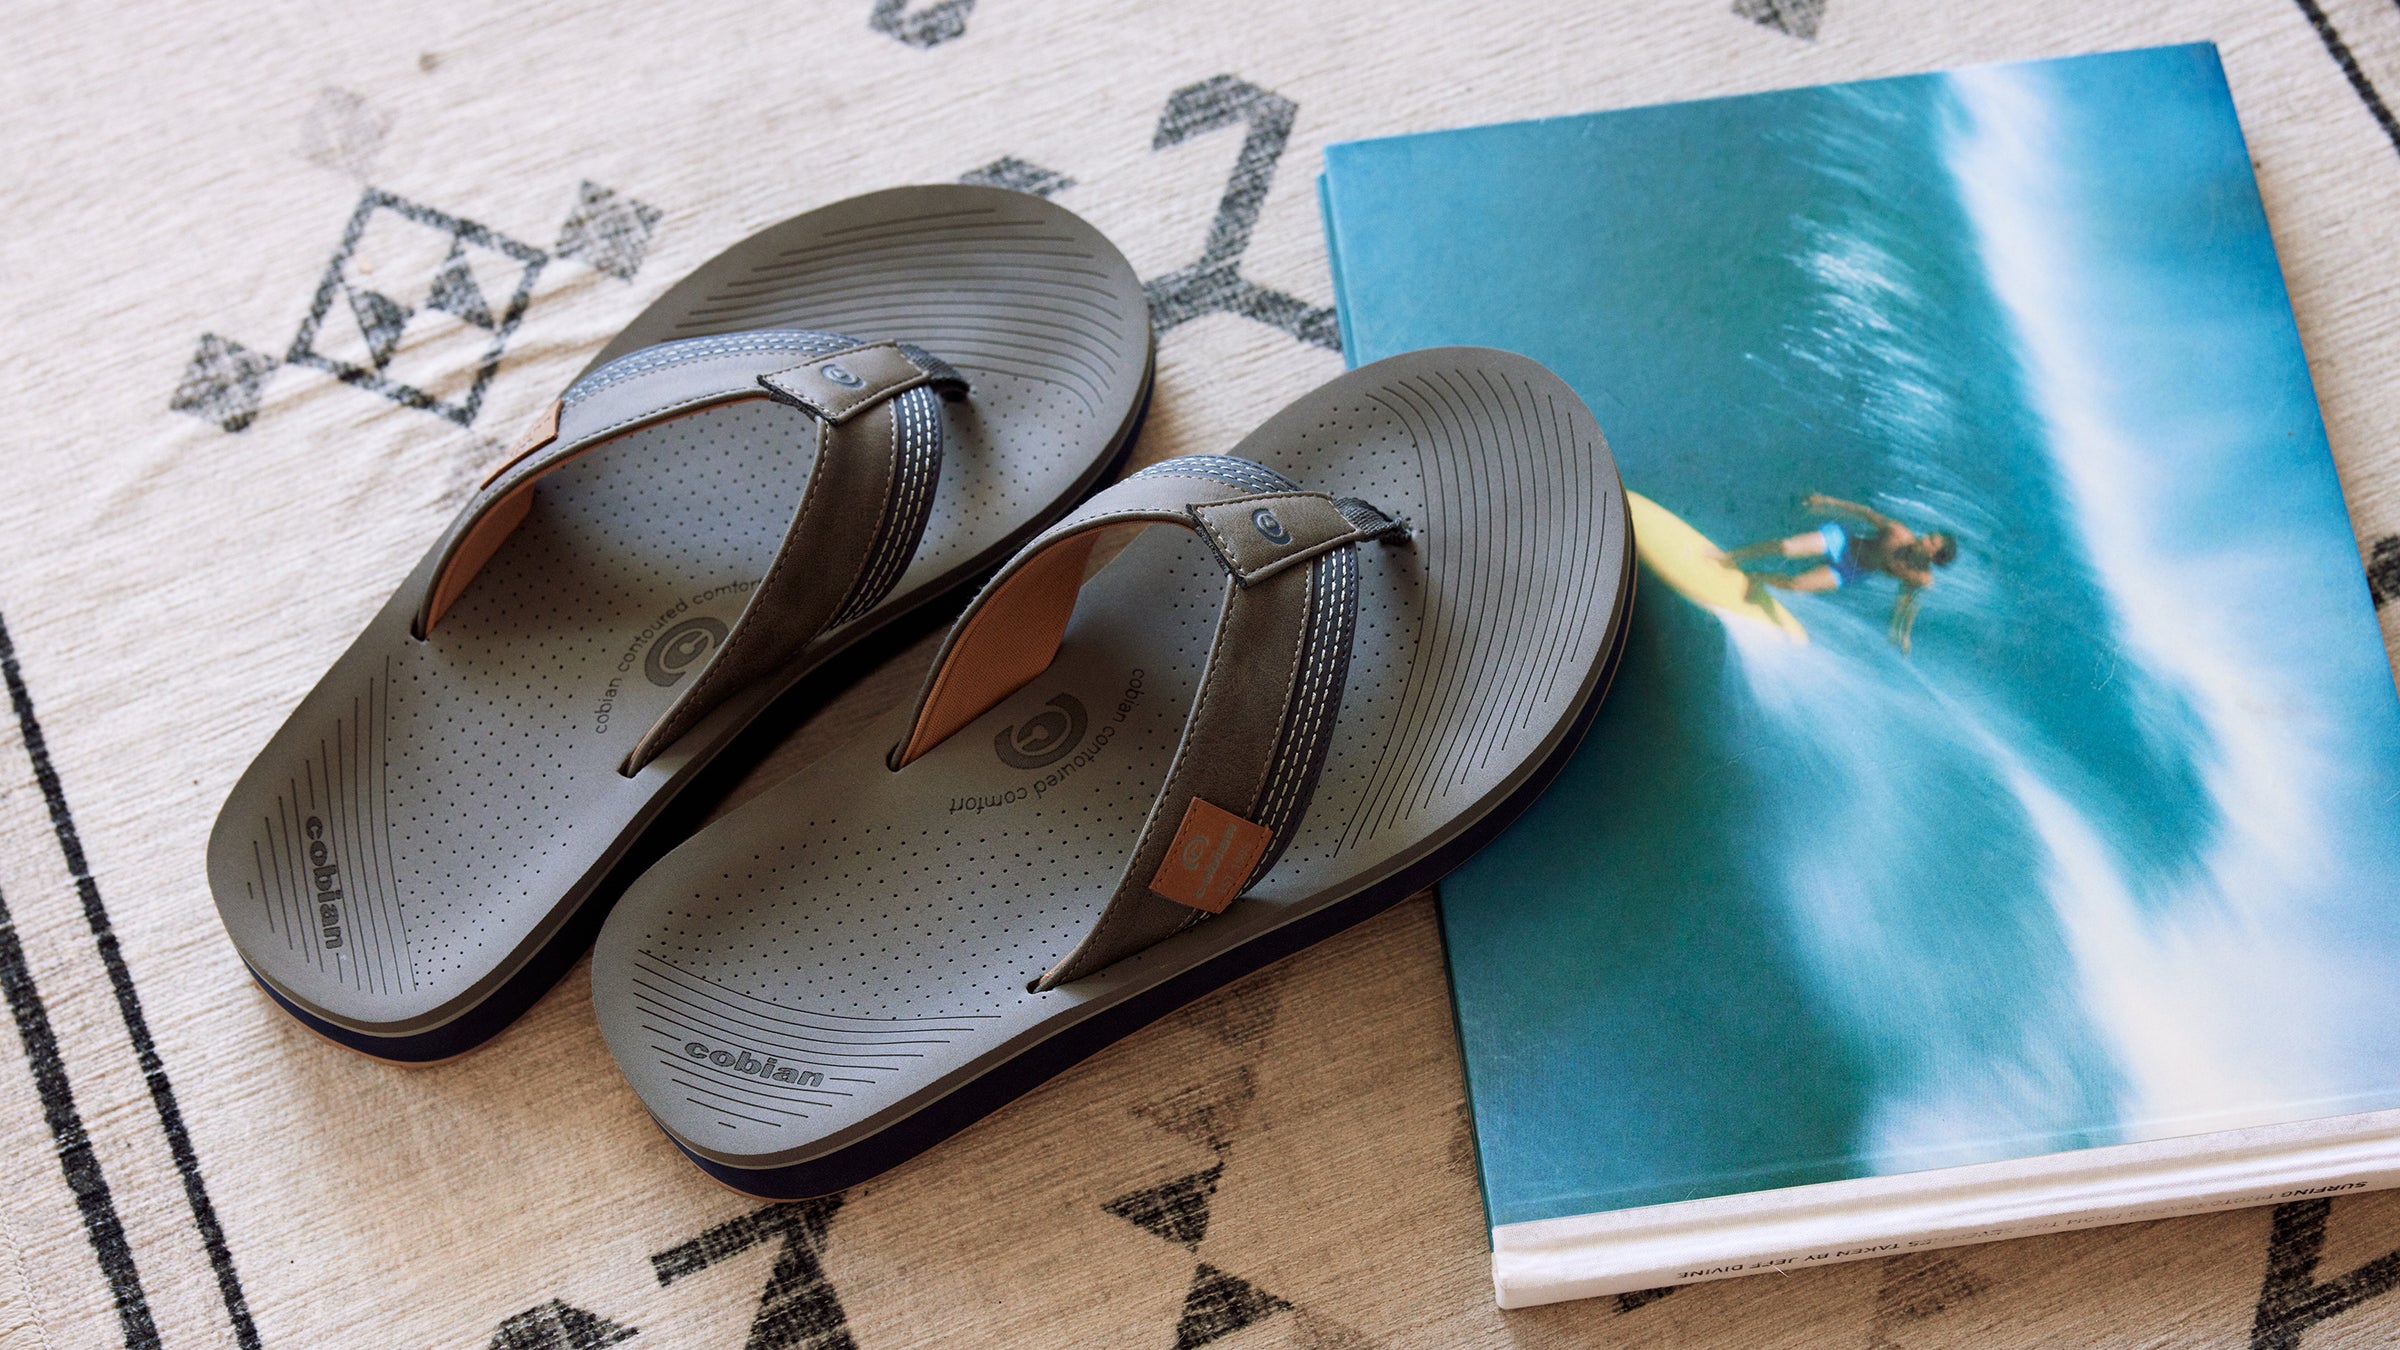 Cobian Roca Rise Grey Sandals merchandised next to a surfing book